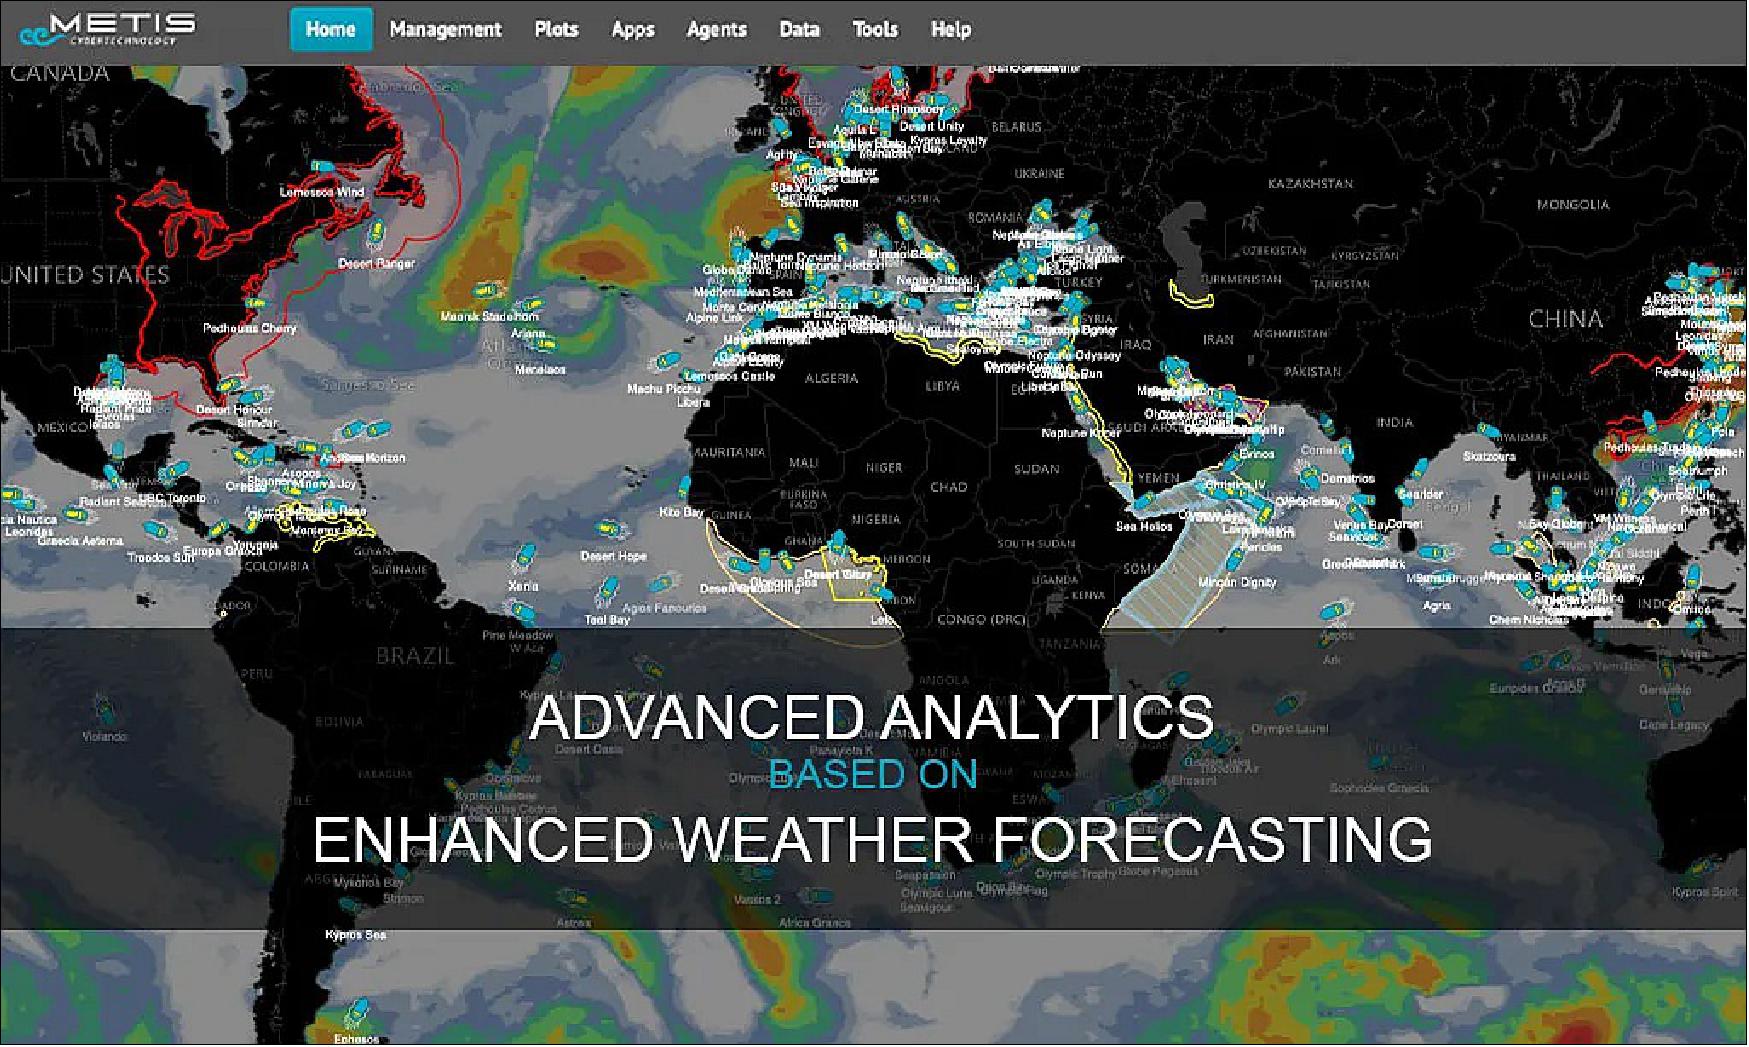 Figure 118: The collaboration with Spire gives METIS complete global coverage of weather conditions with no blind spots, allowing METIS analytics to take account of all weather-related eventualities (image credit: VPO)